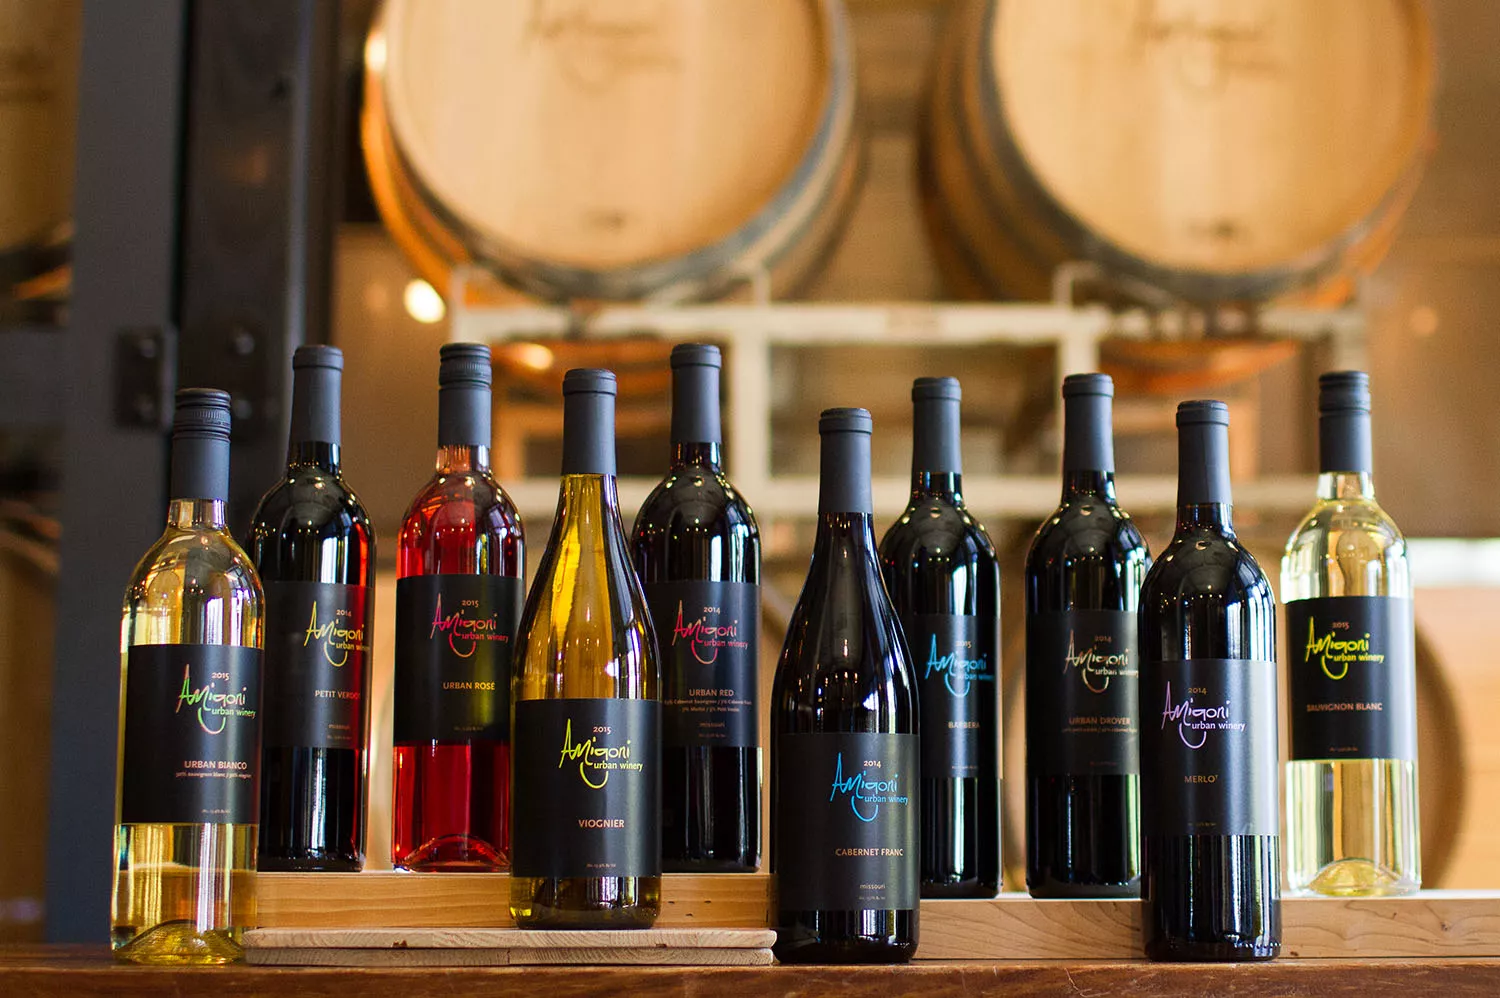 Amigoni Urban Winery in USA, North America | Wineries - Rated 0.8